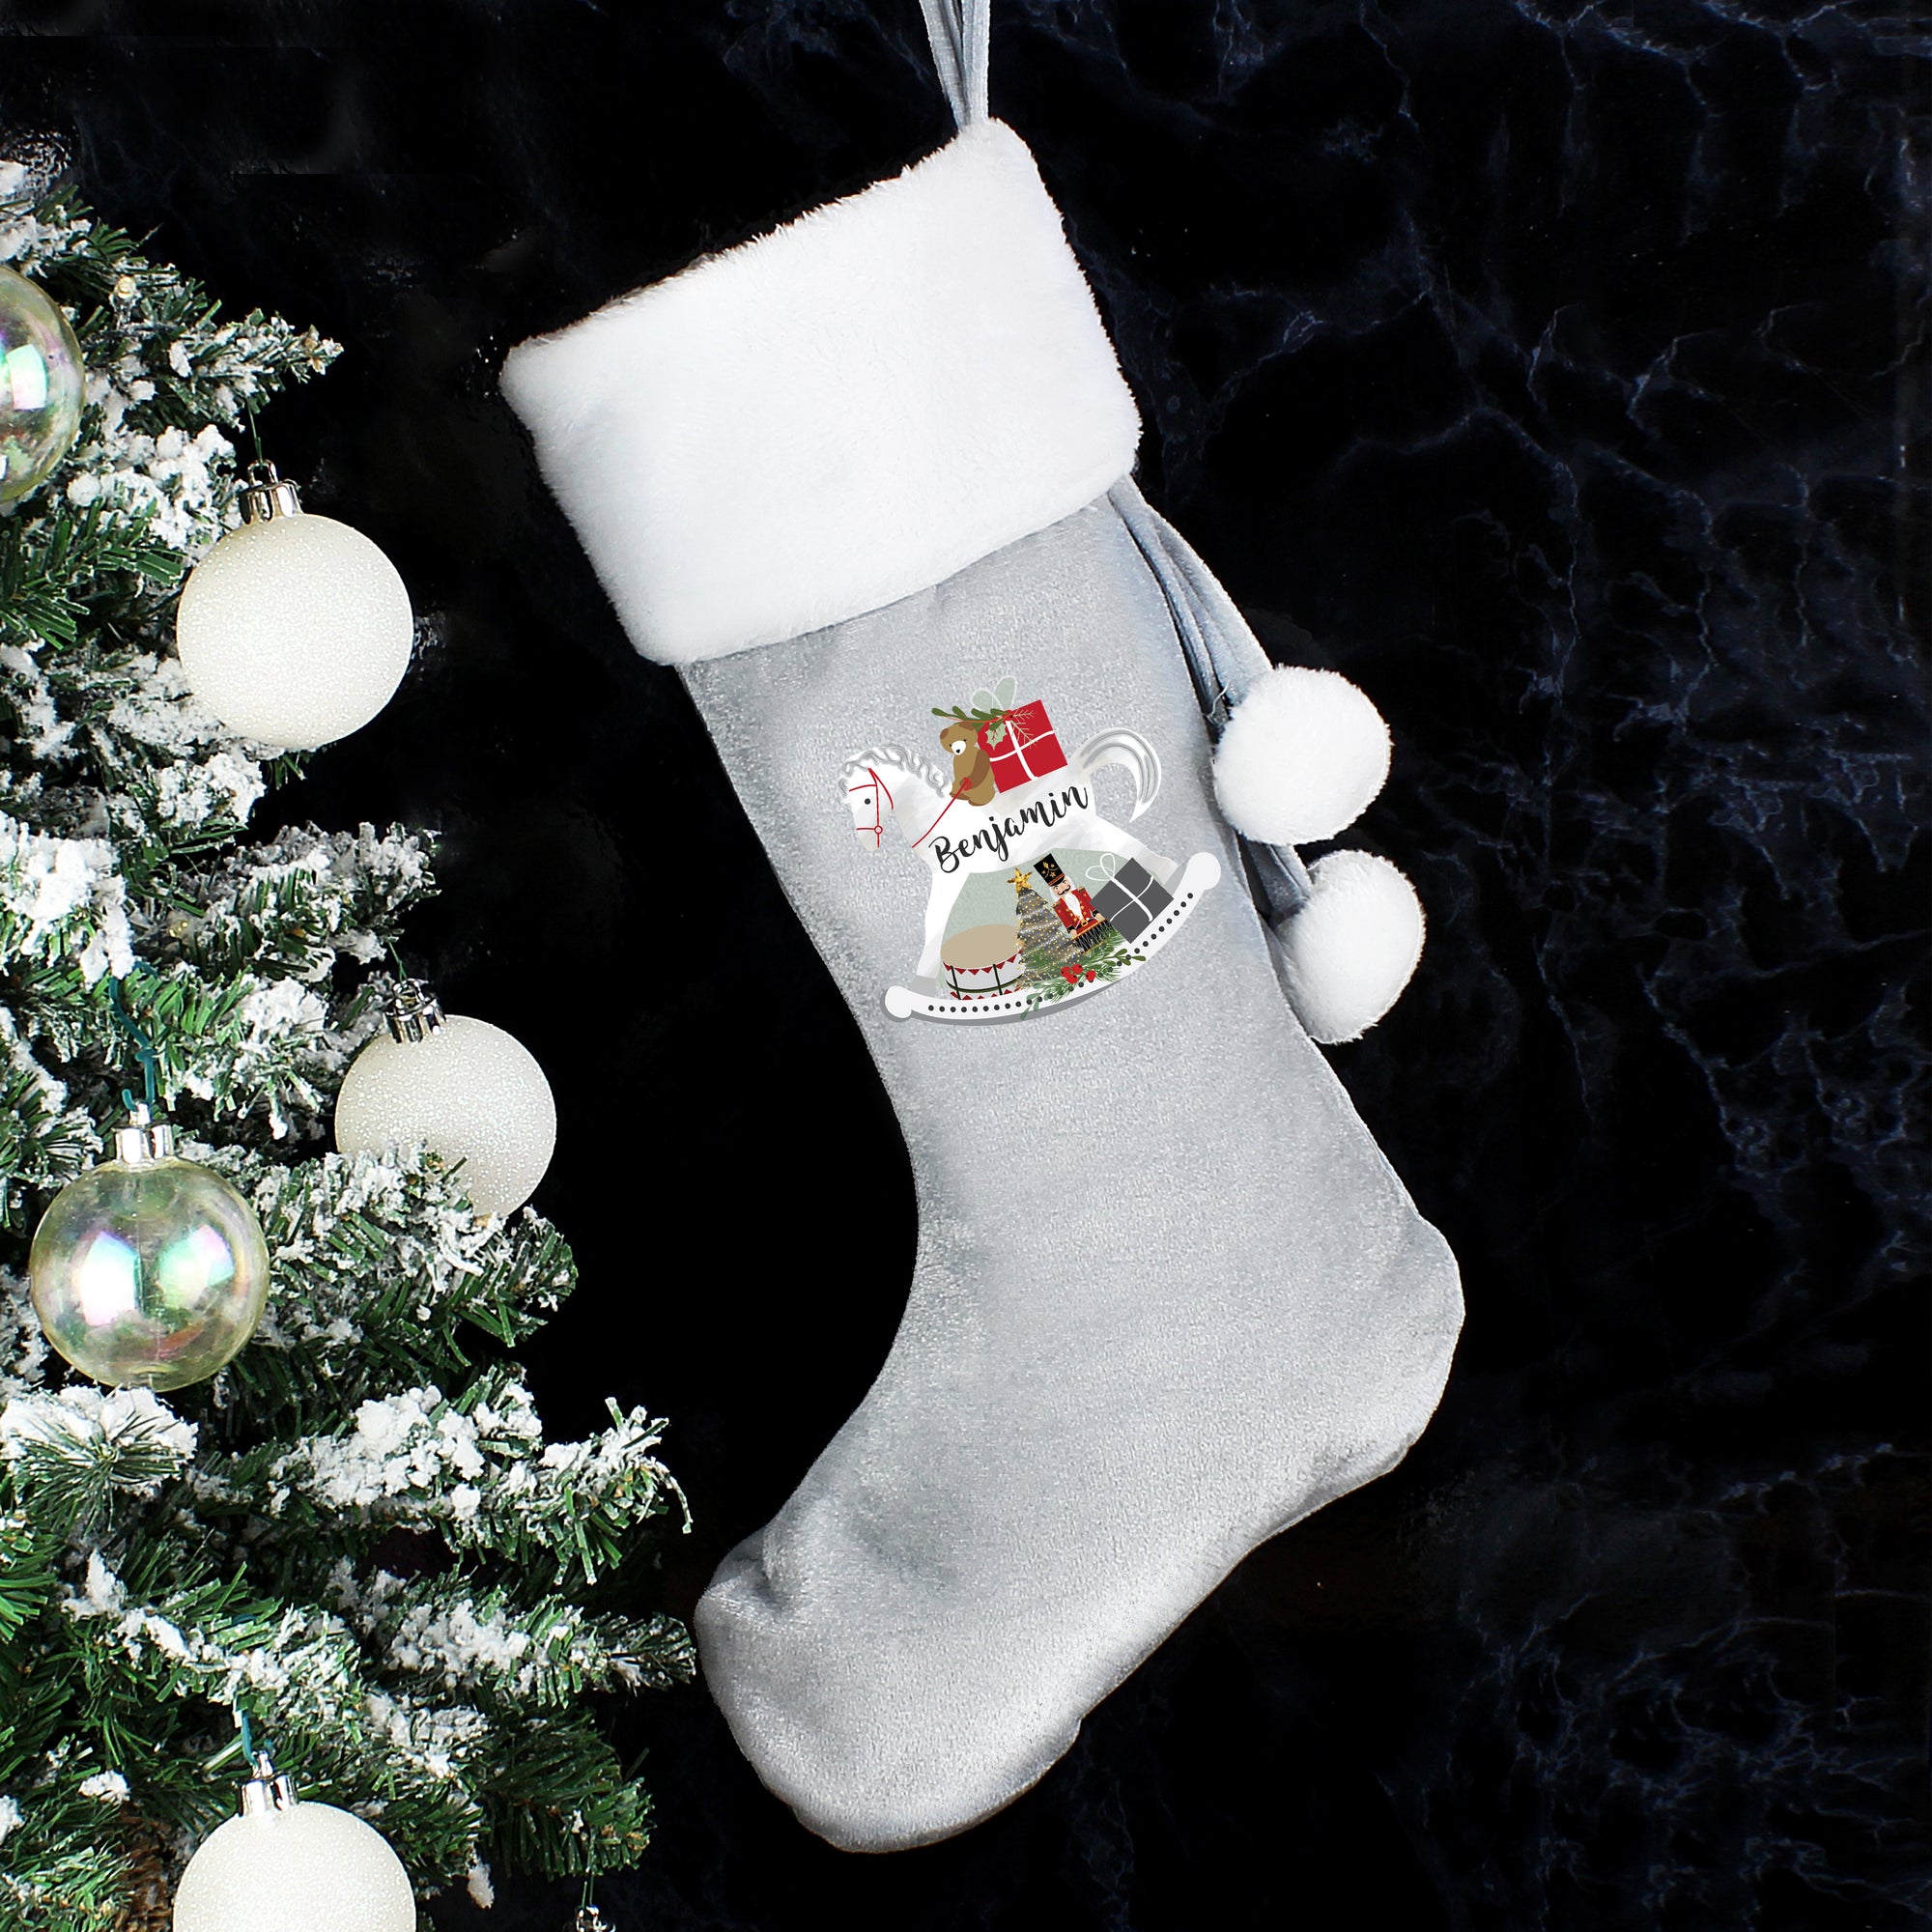 Personalised silver velvet Christmas stocking featuring an illustration of a rocking horse on the front which can be personalised with a name of up to 12 characters which will be printed in a modern black cursive font on the body of the rocking horse. The stocking has a white plush cuff and has a loop at the top so it can be hung from a hook.